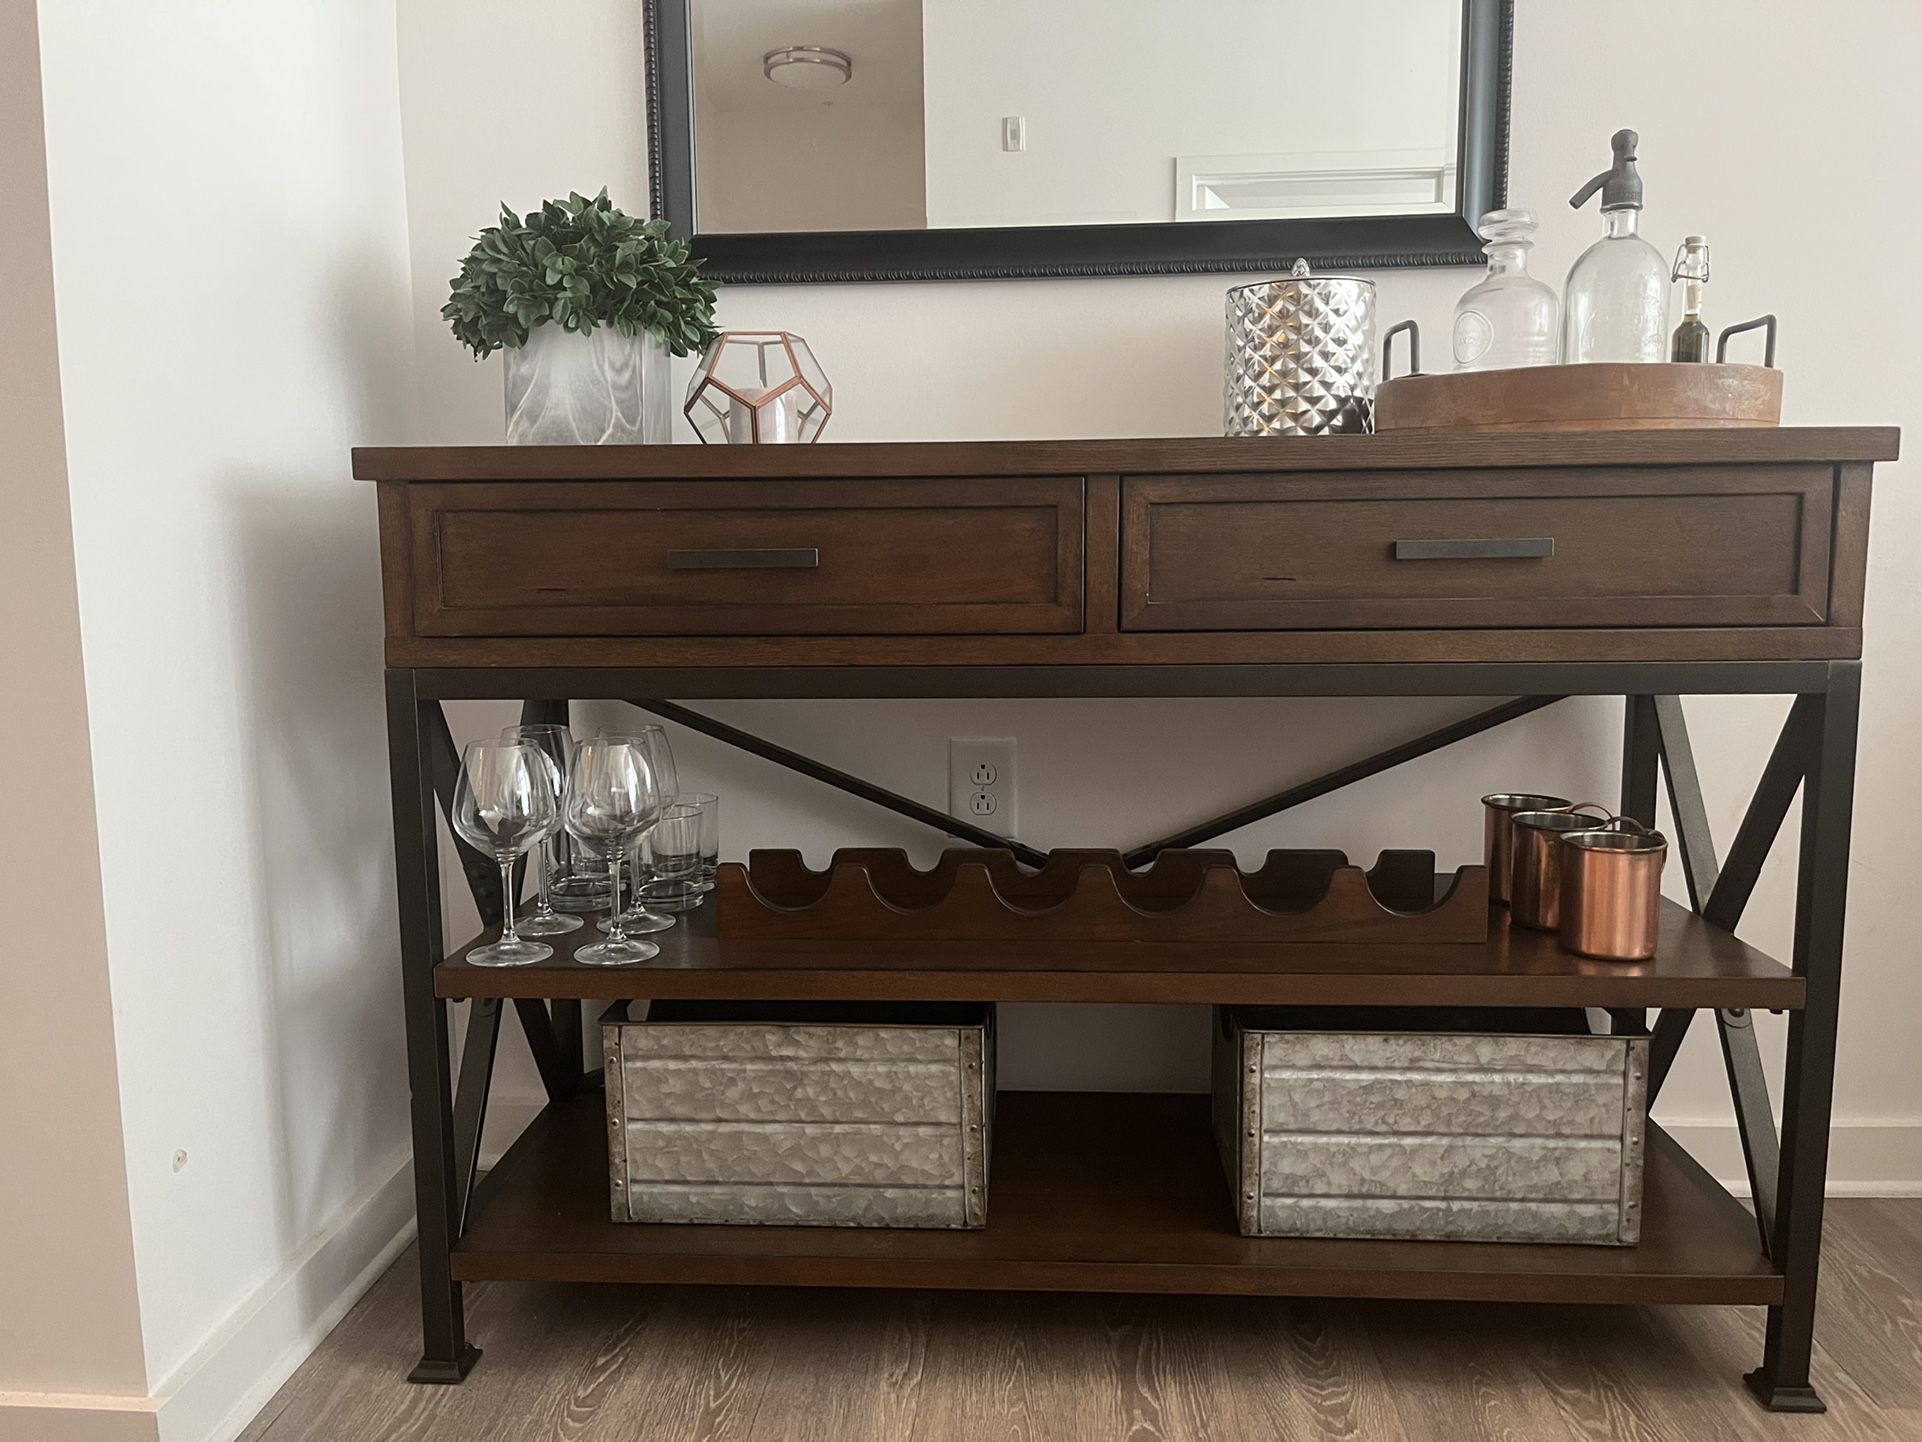 Credenza/ Side Table With 6 Bottle Wine Rack